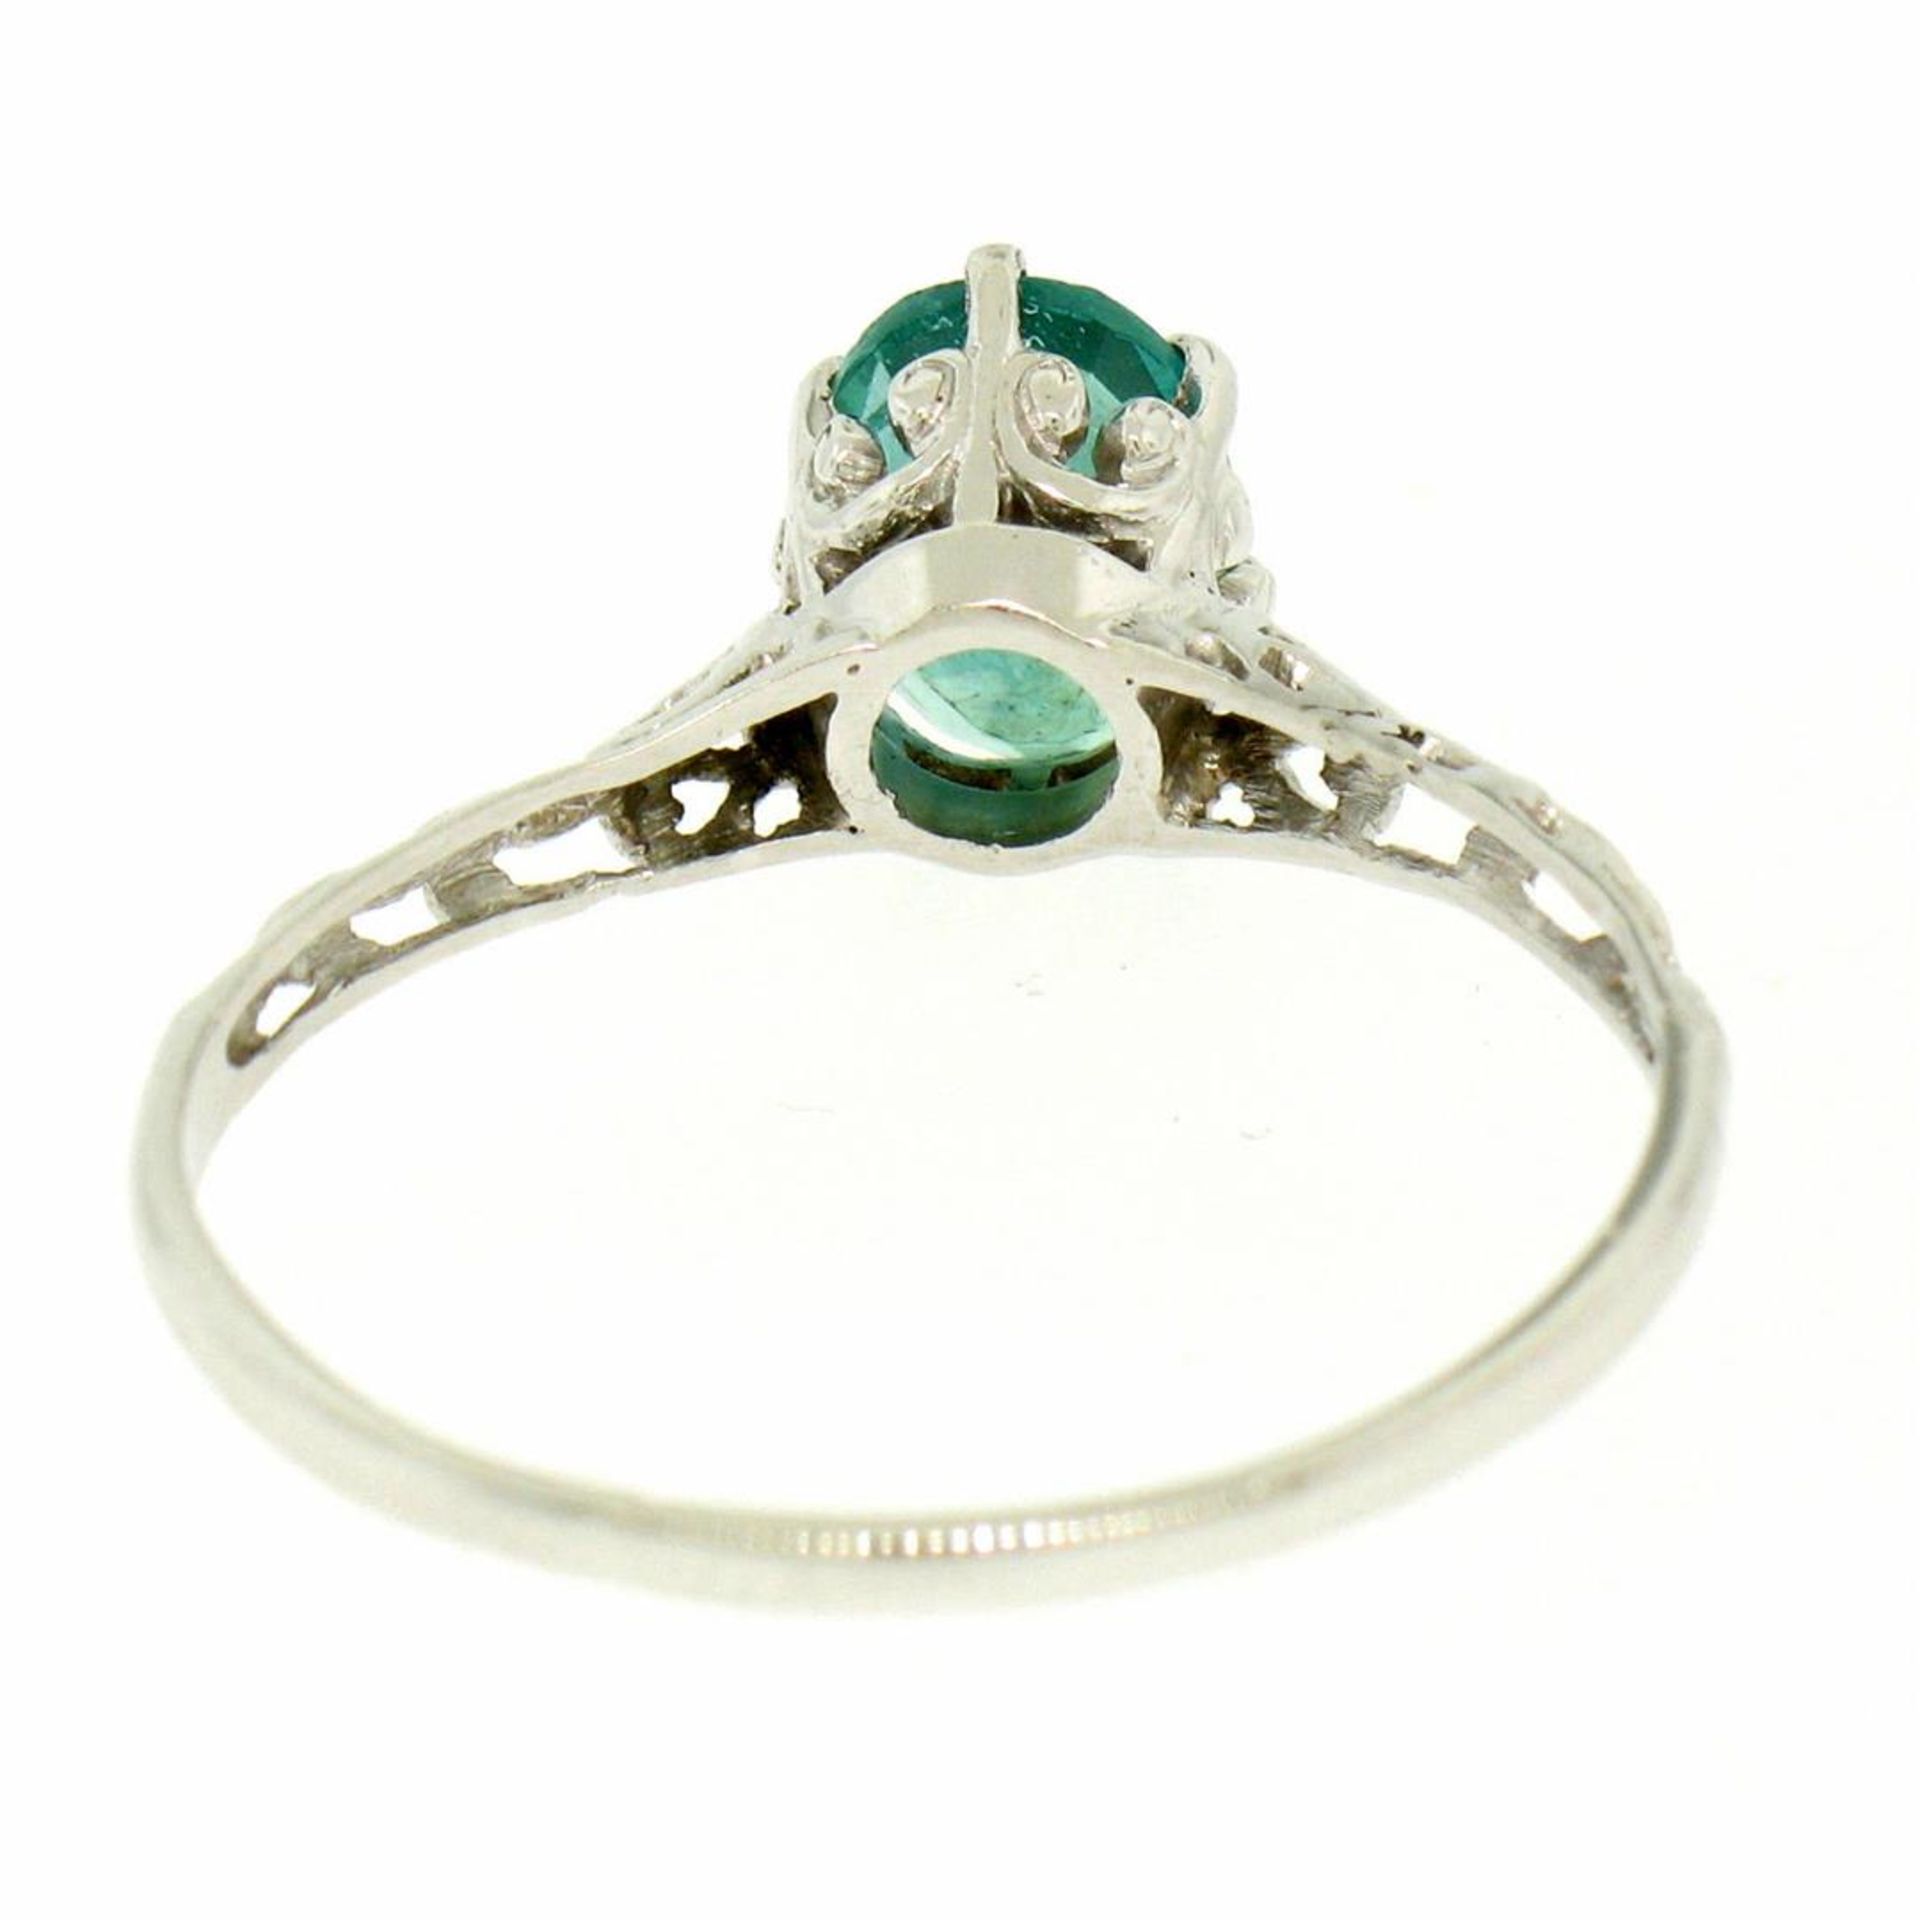 14k White Gold 1.38 ct Prong Set Oval Cut Emerald Filigree Solitaire Ring - Image 8 of 8